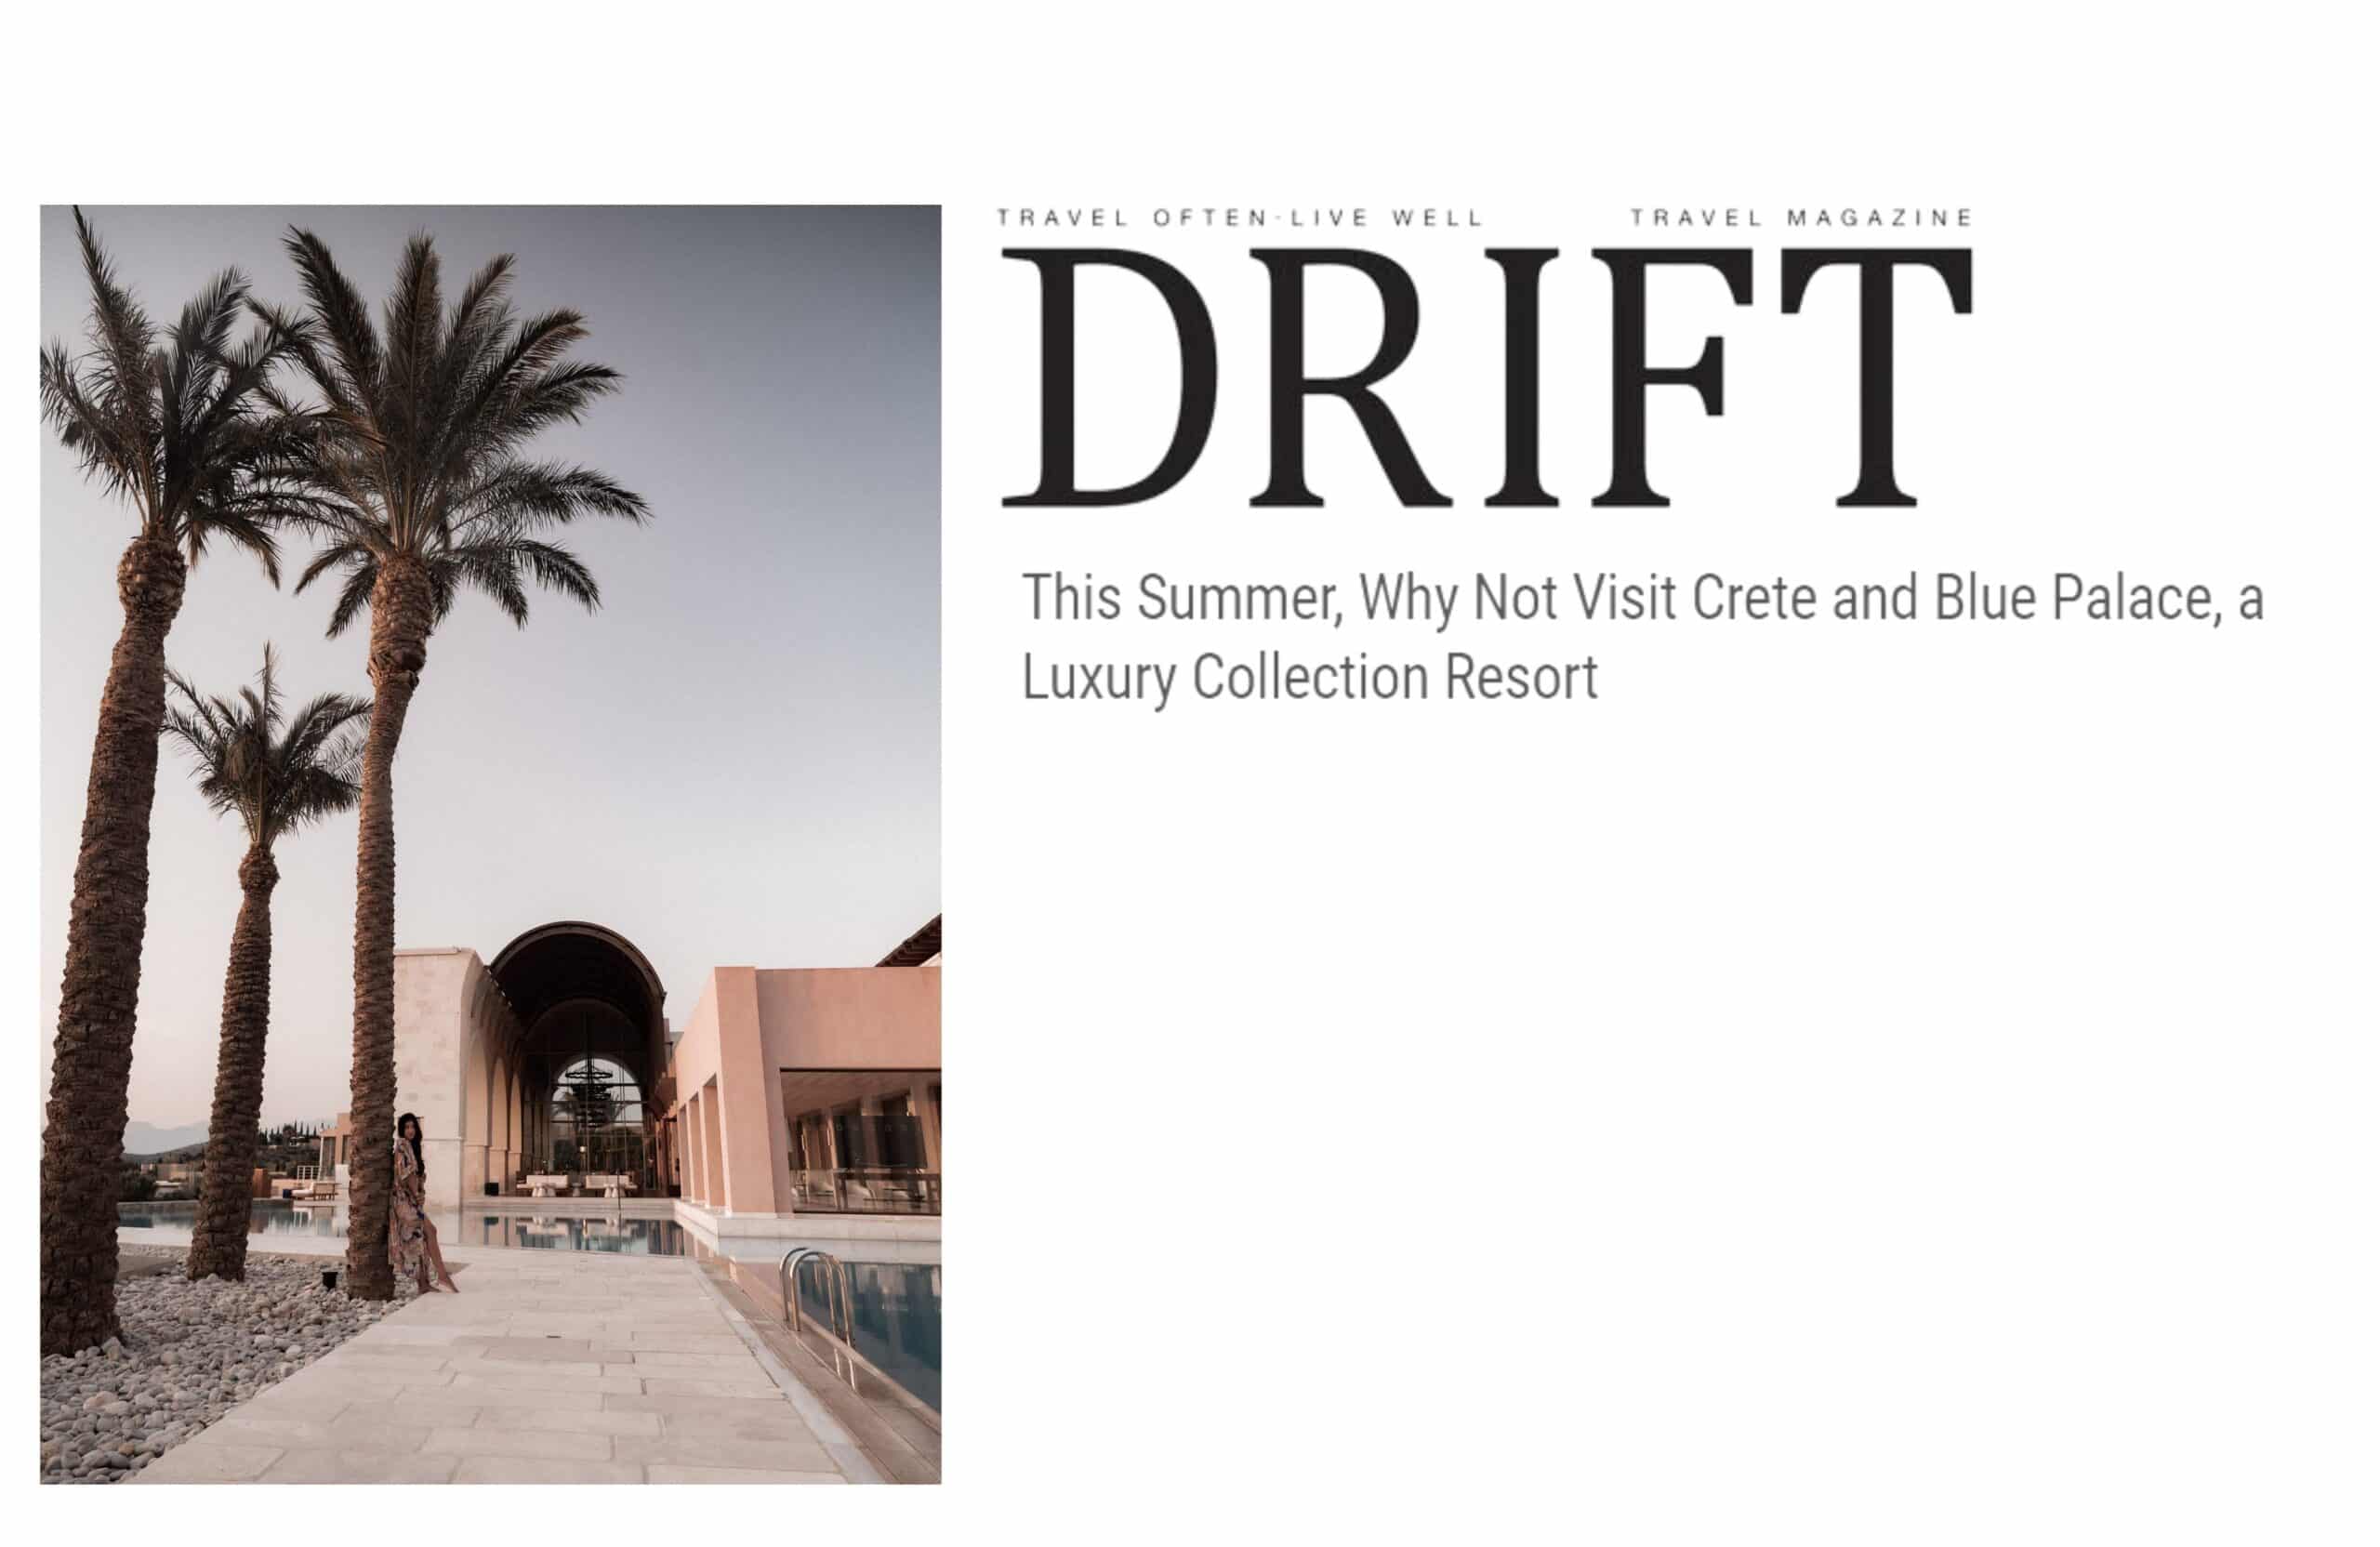 This Summer, Why Not Visit Crete And Blue Palace, A Luxury Collection Resort, In Drift Travel